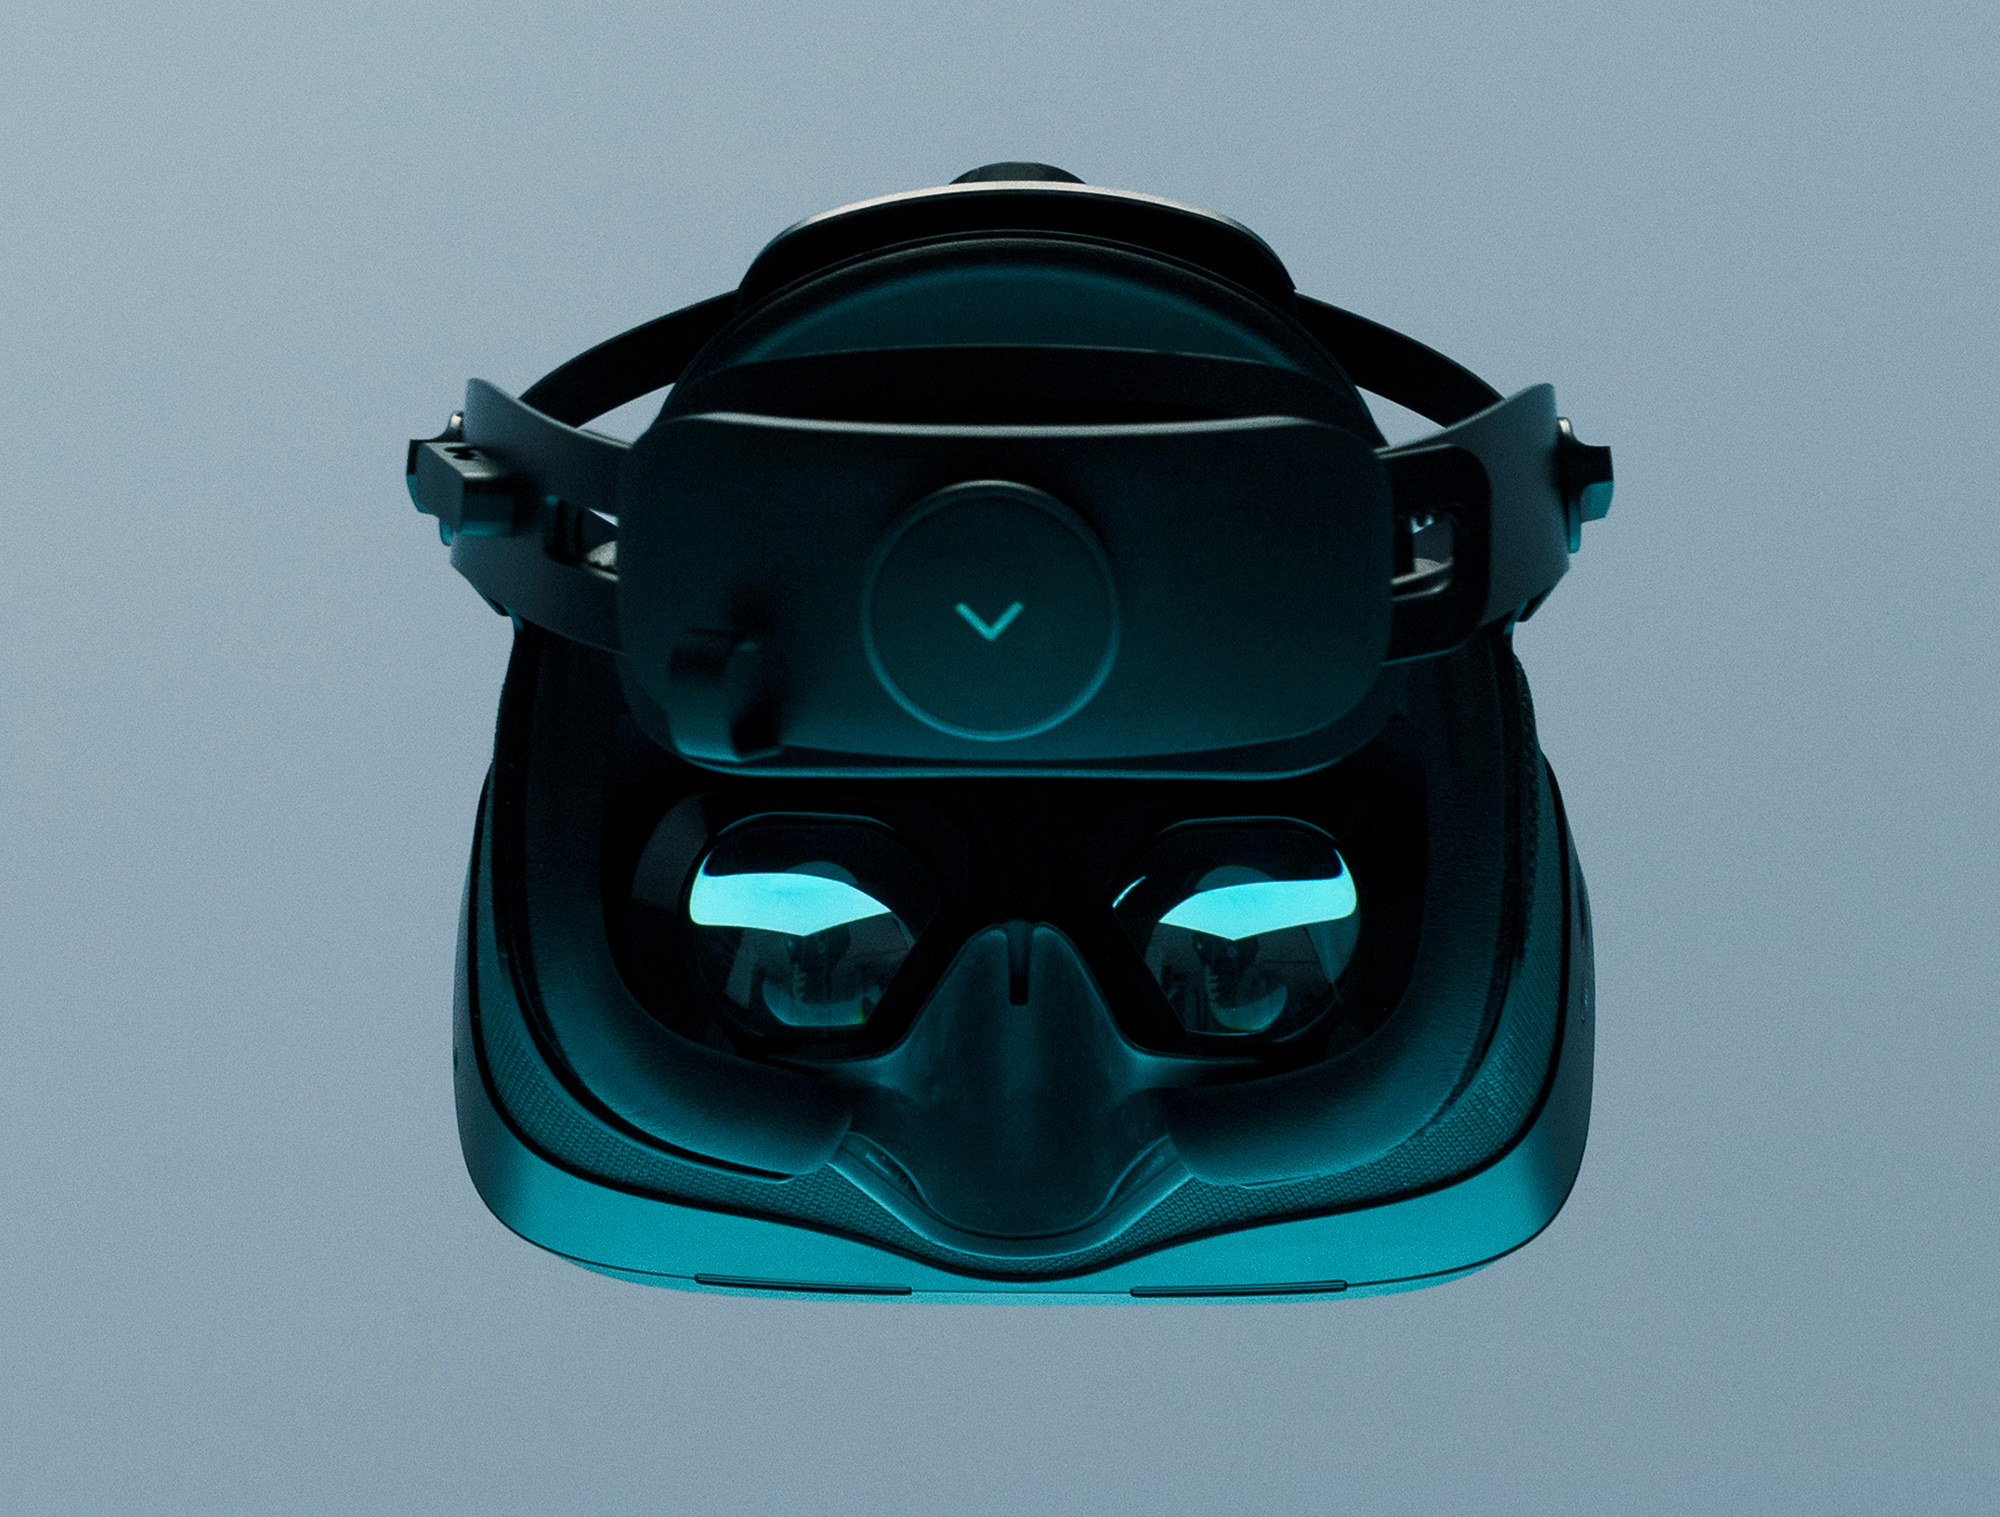 How to choose your VR headset? PICO headset